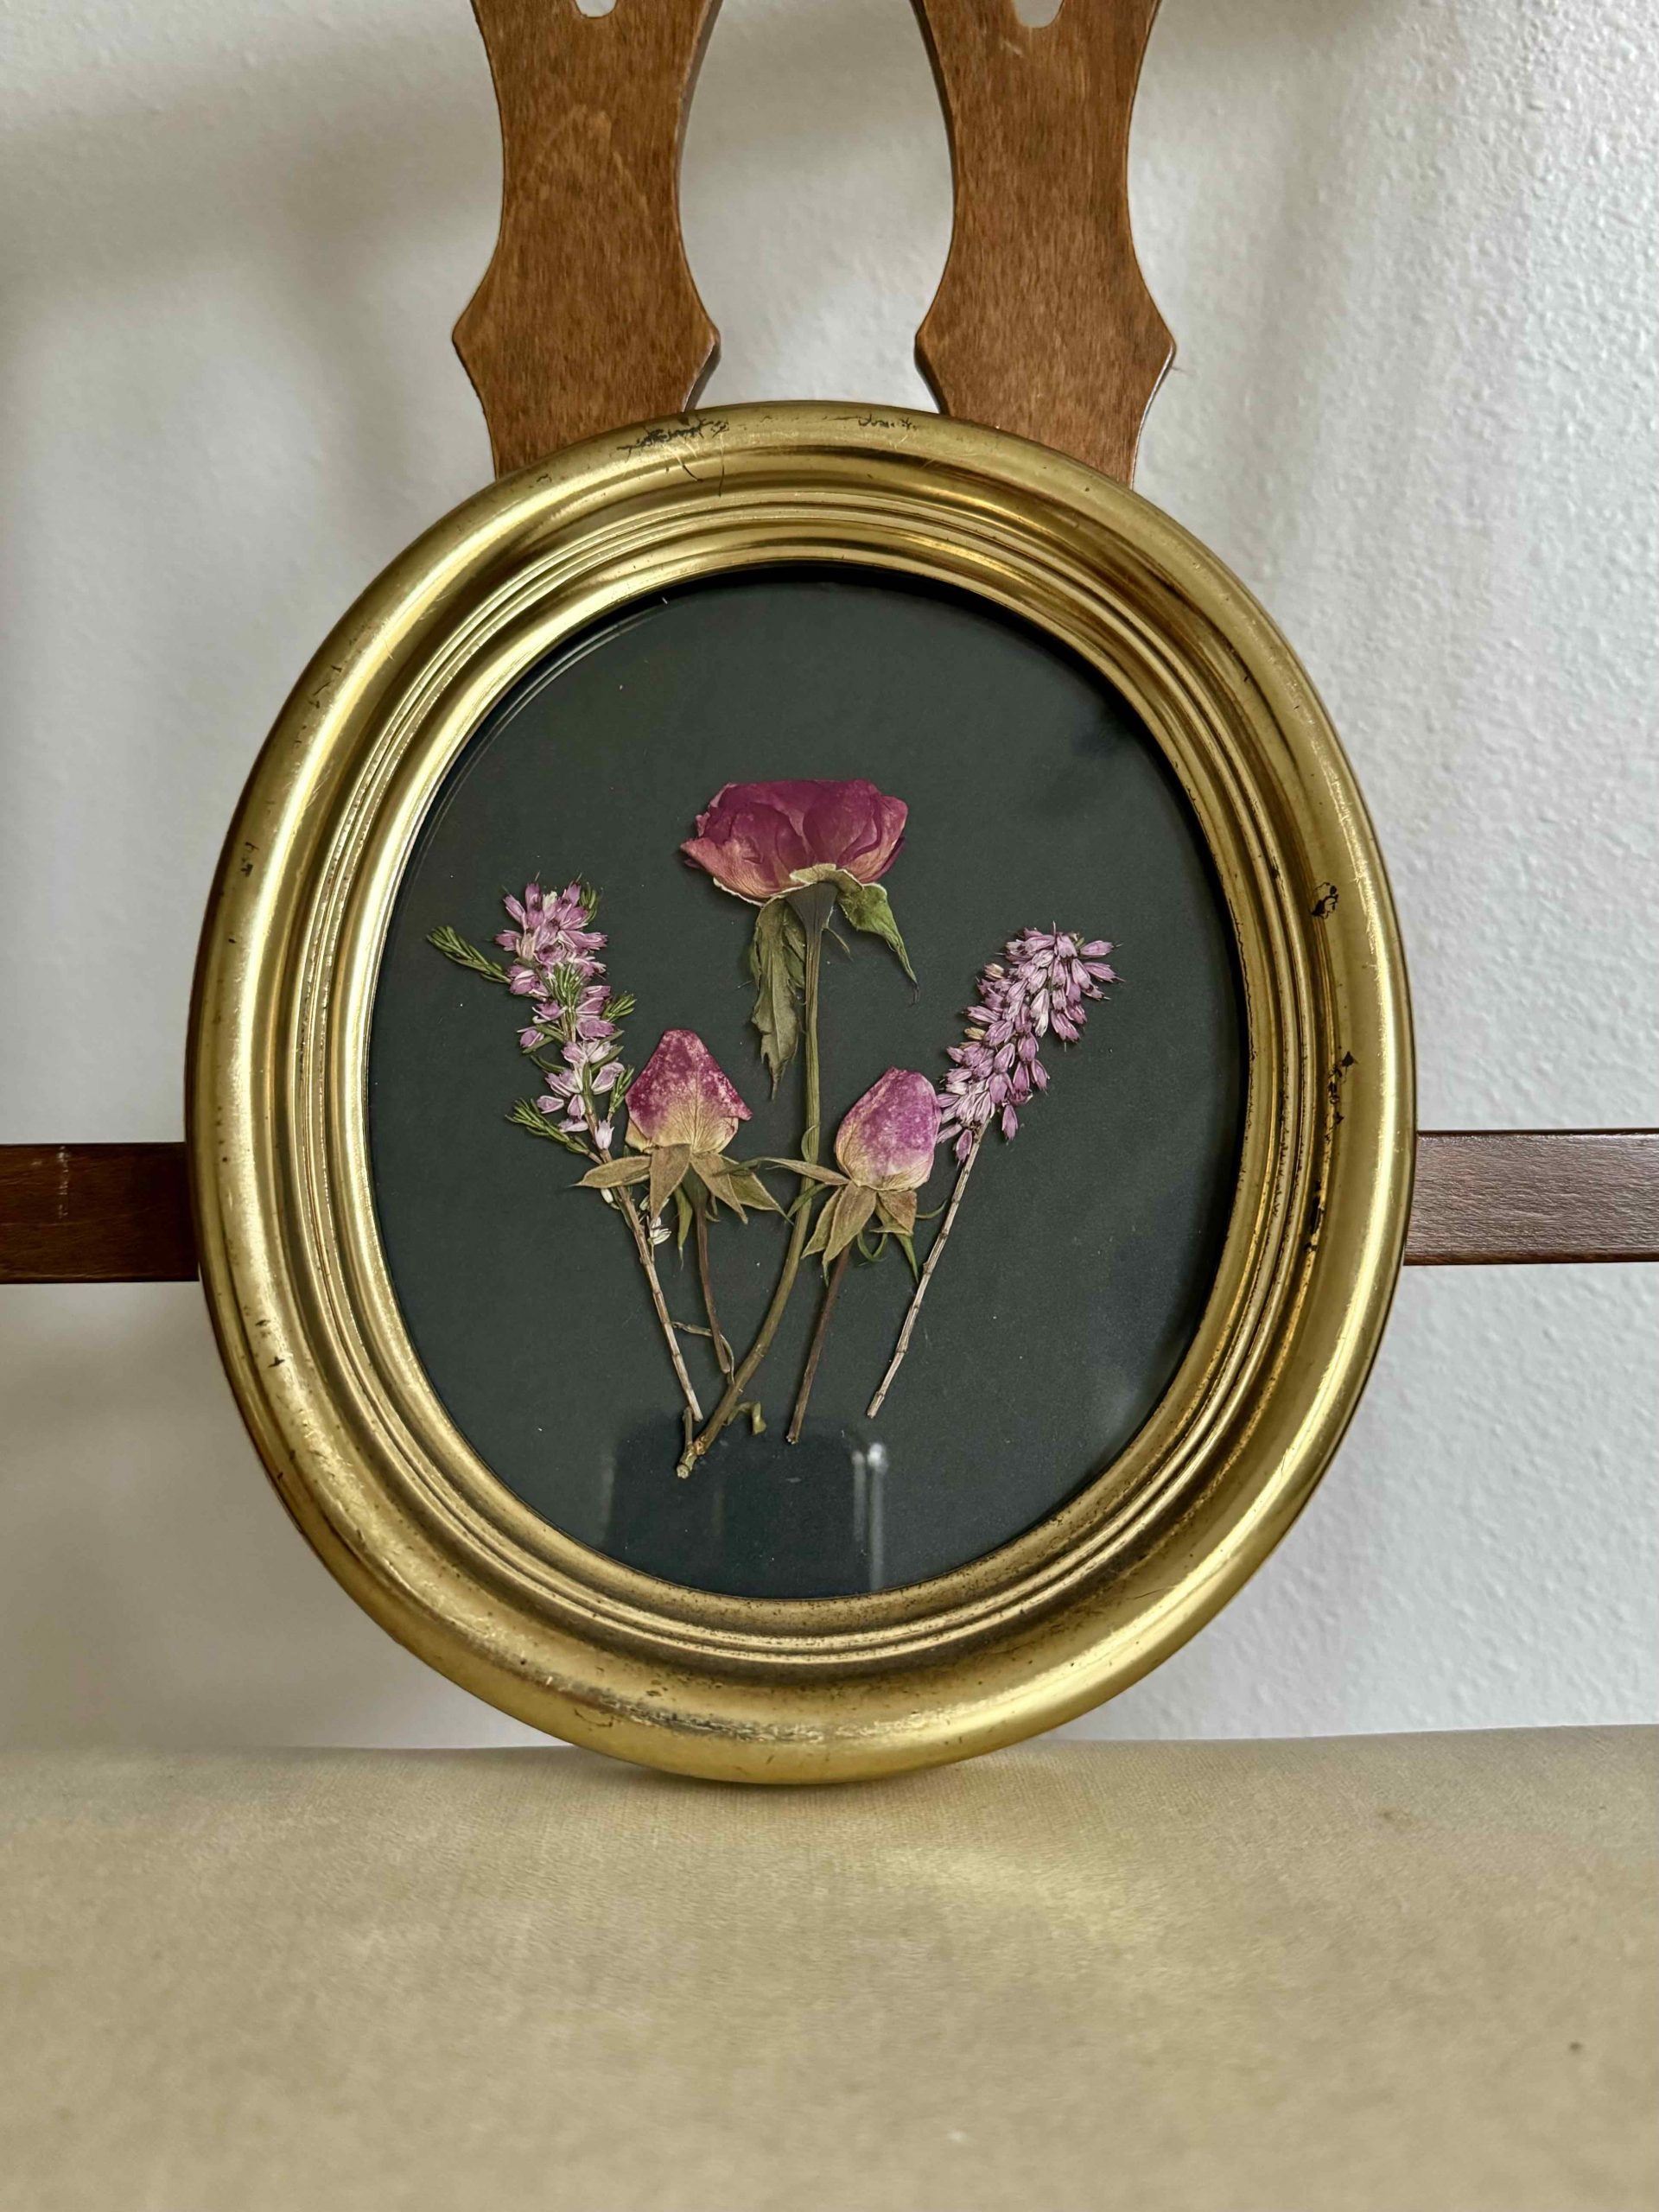 Three pink rose buds and two heather blooms pressed on black paper in oval vintage frame by Kindness Roots